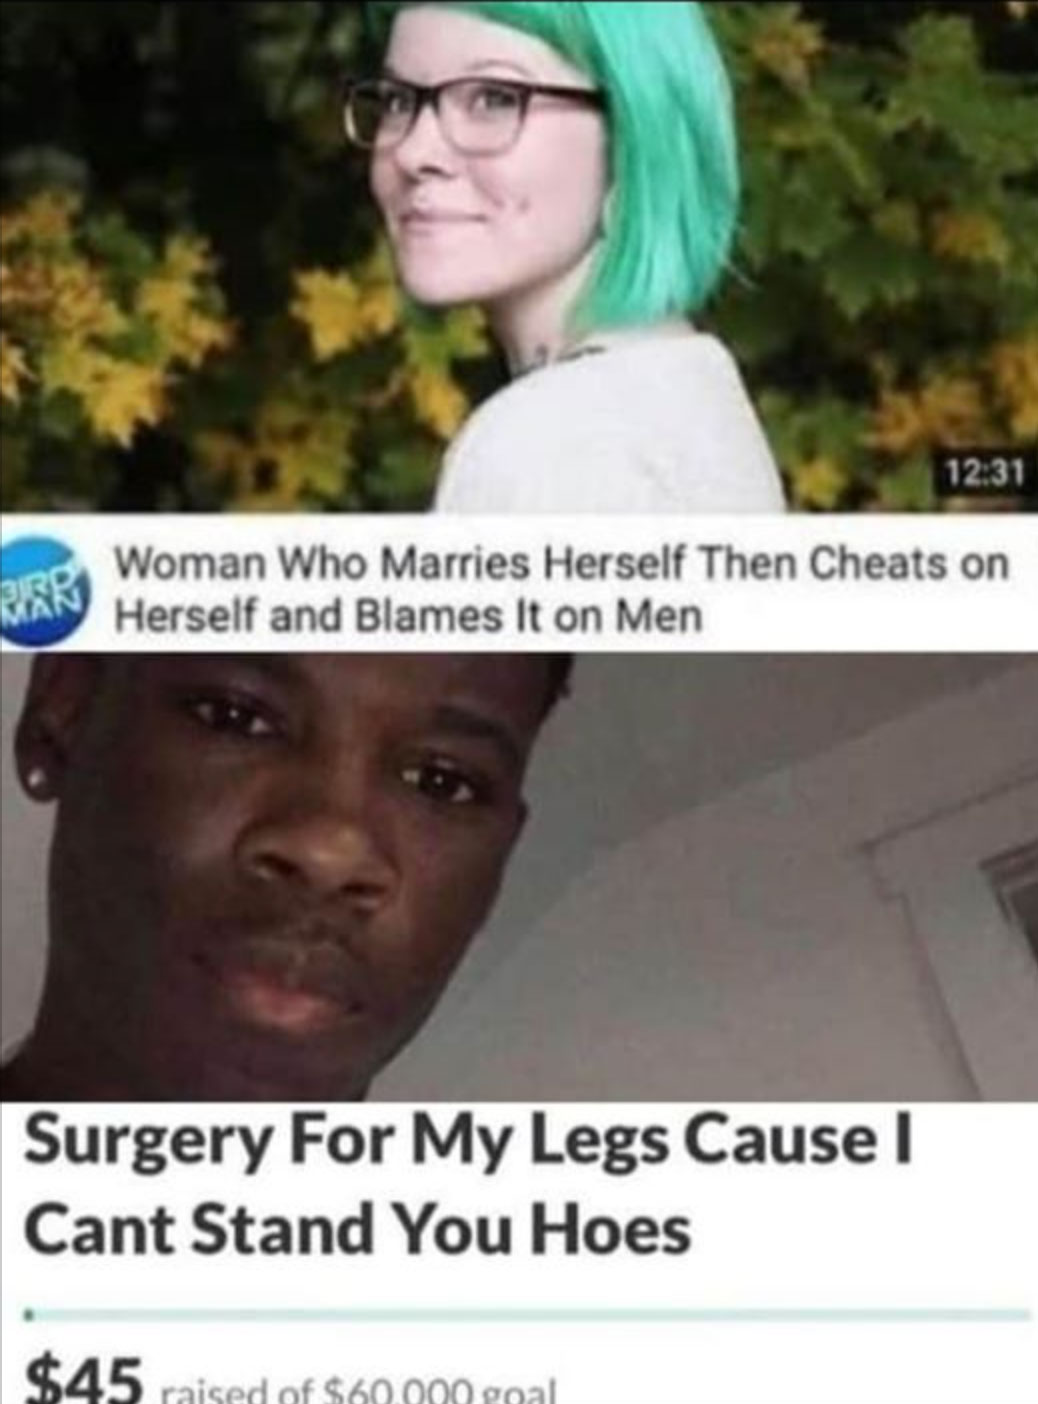 woman who marries herself then cheats on herself and blames it on men - 3RD Man Woman Who Marries Herself Then Cheats on Herself and Blames It on Men Surgery For My Legs Cause I Cant Stand You Hoes $45 raised of $60,000 nal